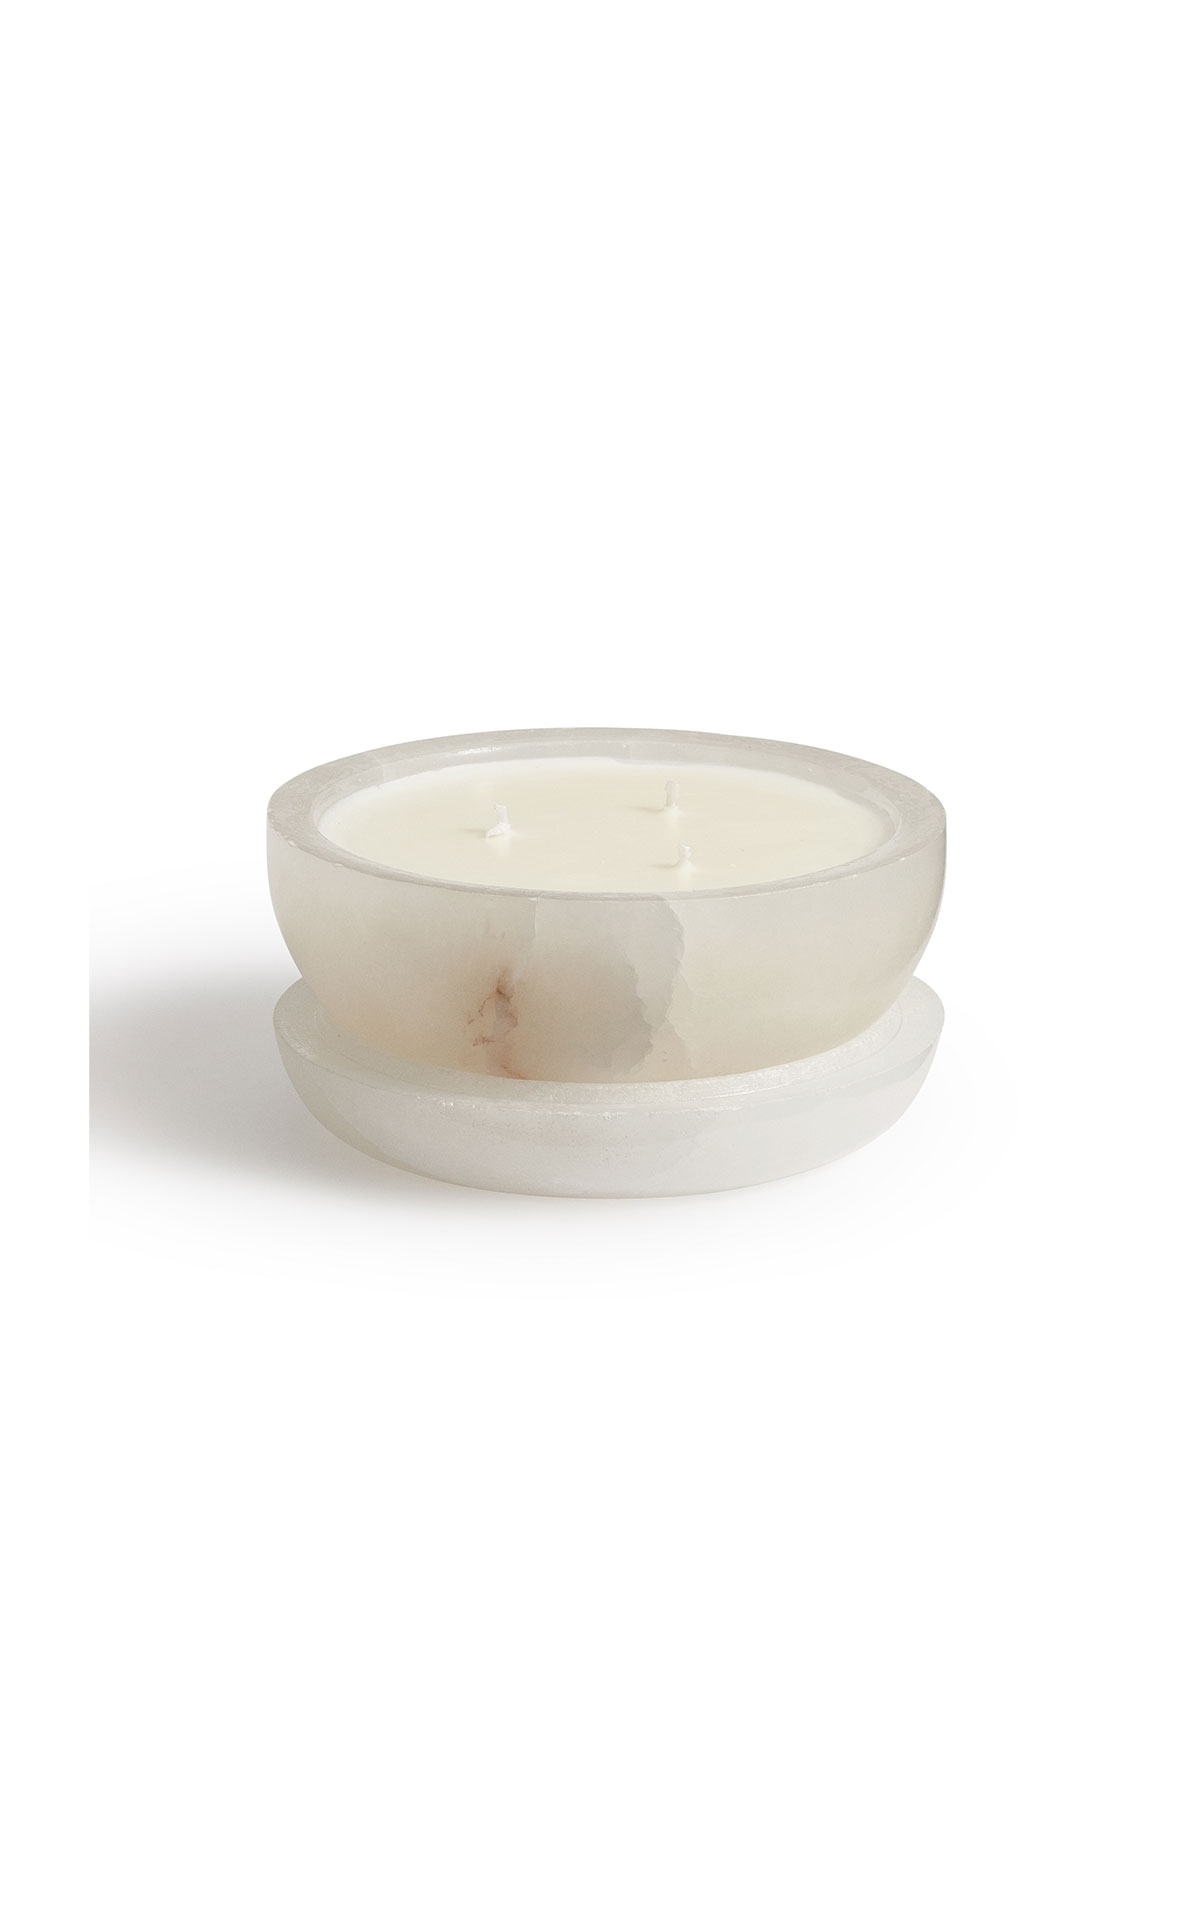 Soho Home Tasso candle pomelo from Bicester Village